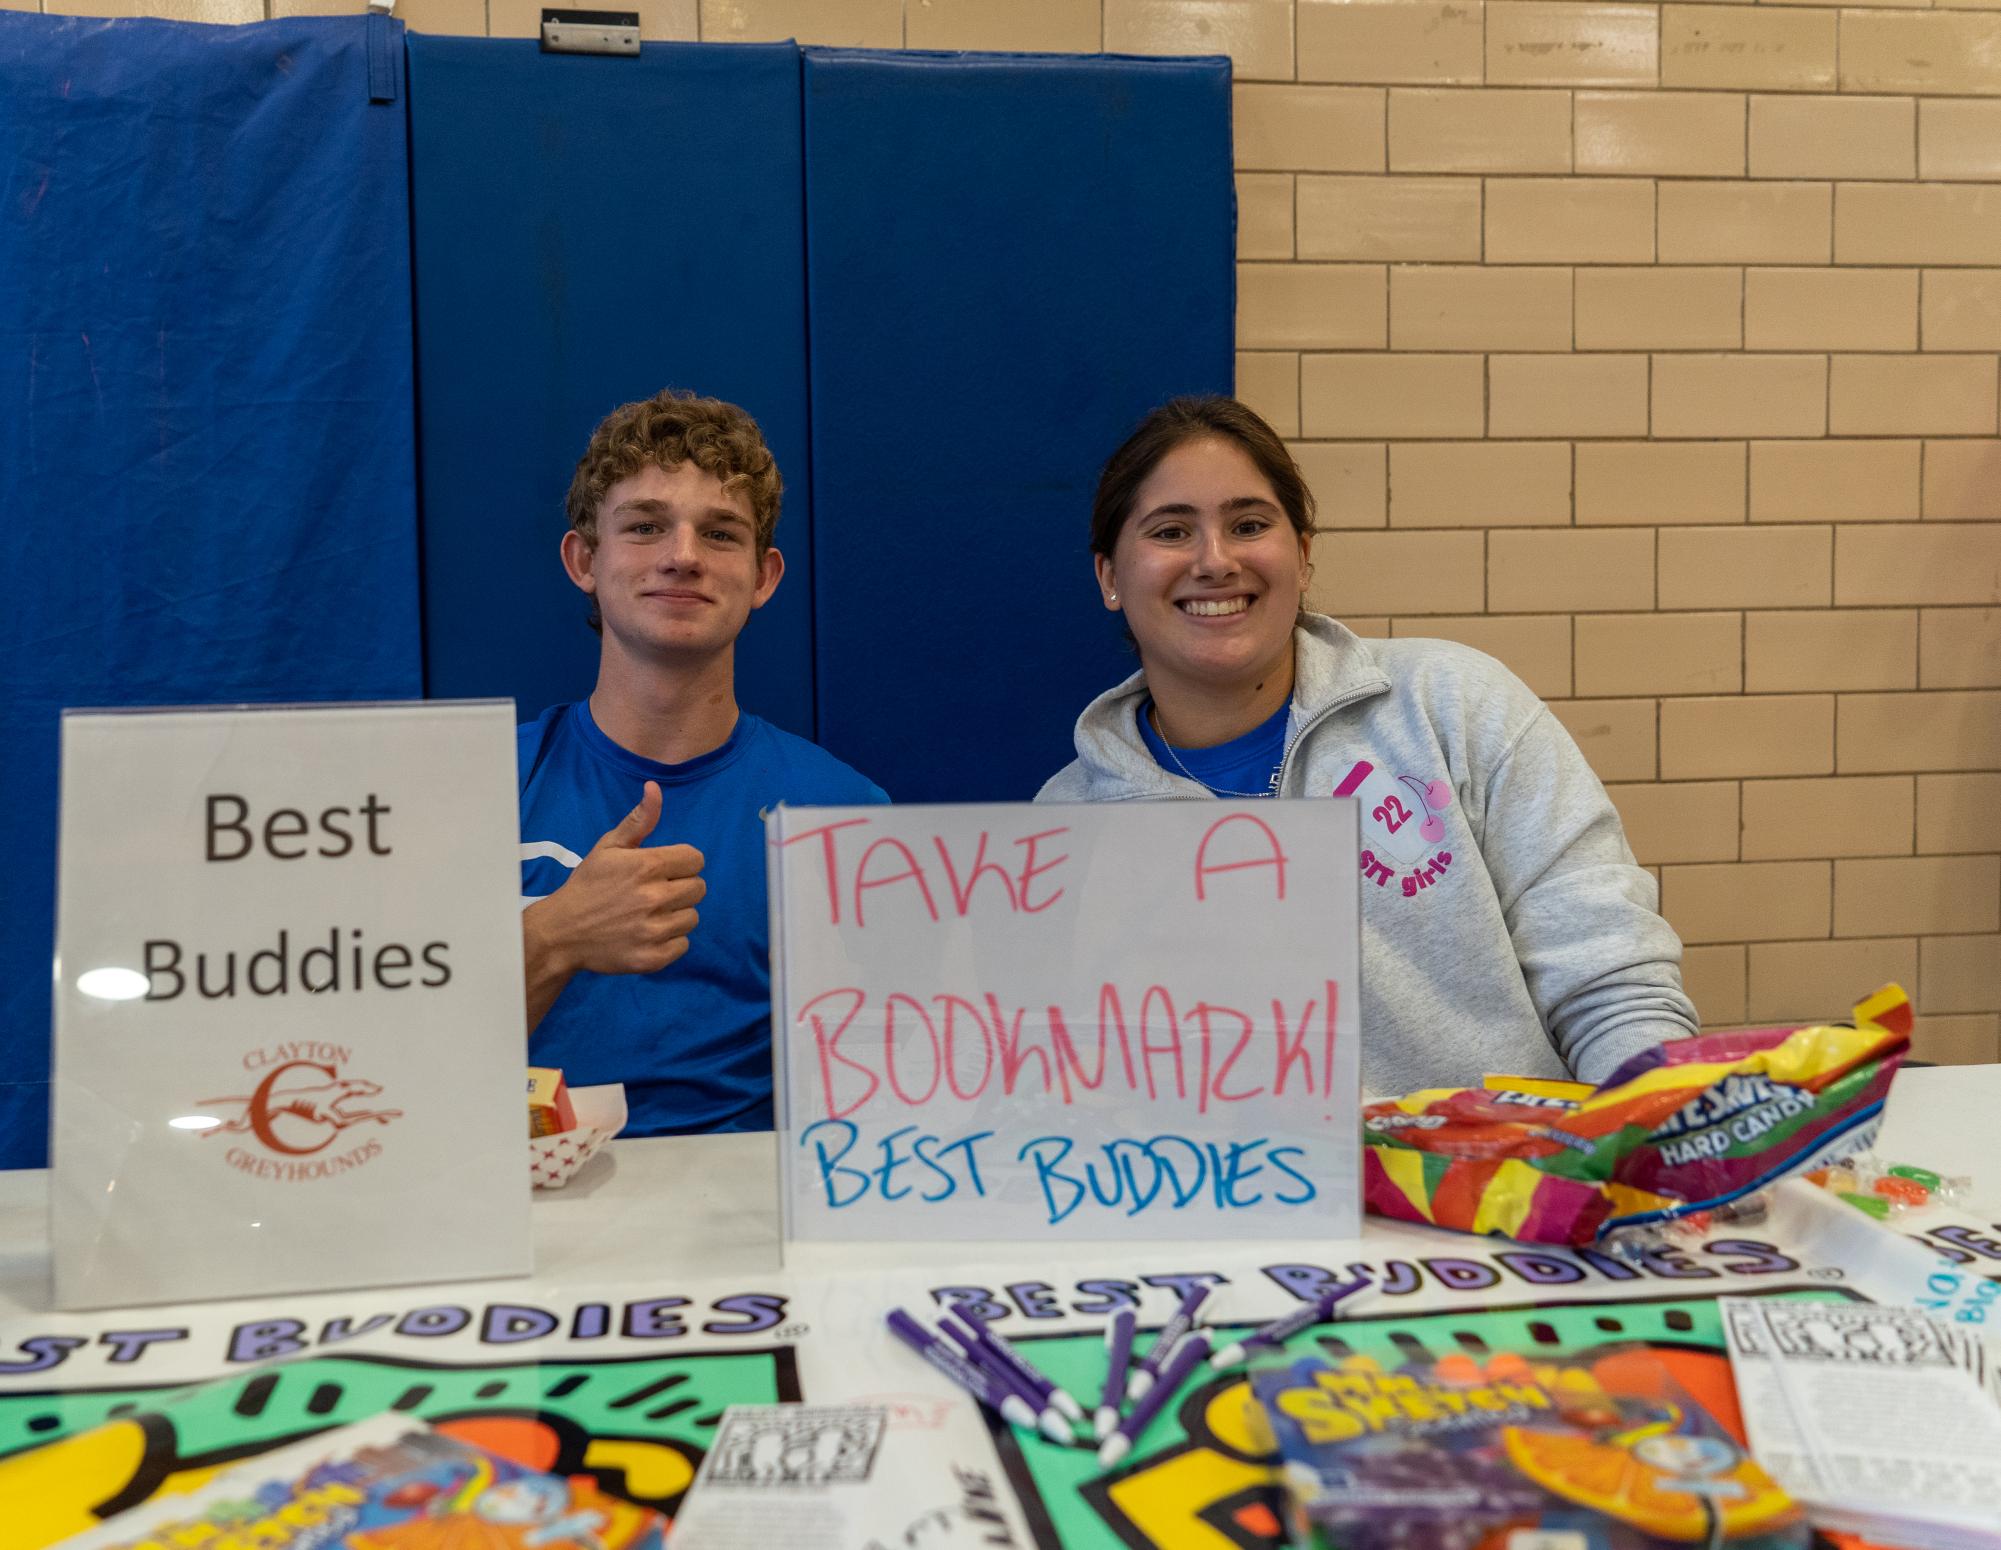 The club fair. Gathering in the gymnasium on August 25th, Best Buddies Club members advertised their organization to the greater student body. Seniors Luke Baker and Alex Cohen worked the table this year. Students mingled while leaders pitched their clubs.